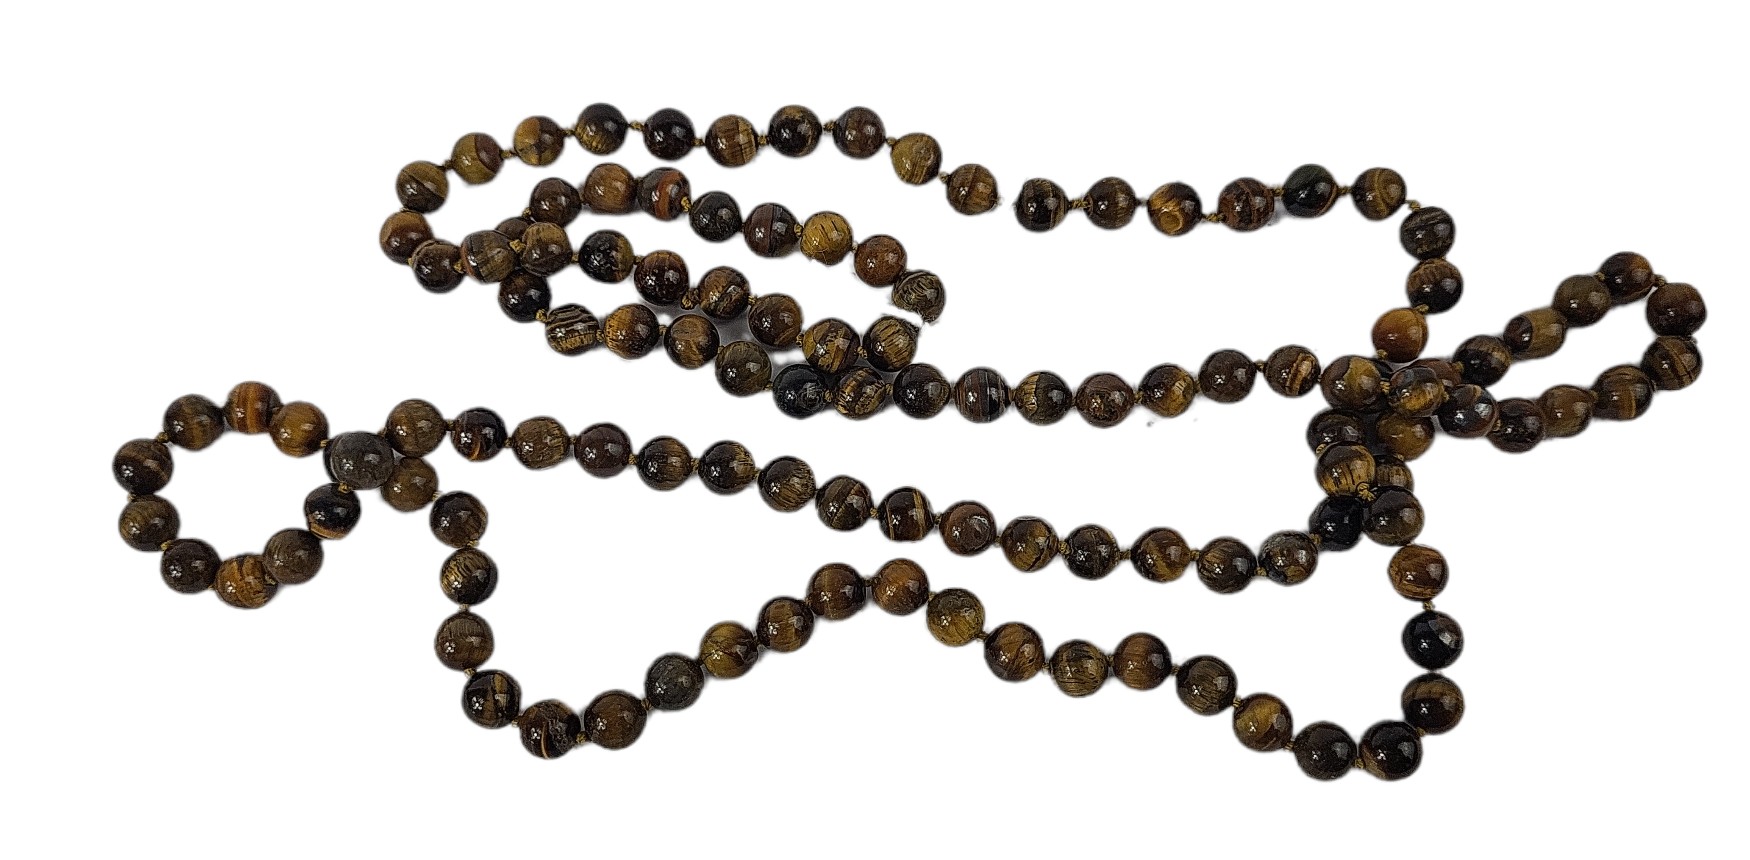 A STRING OF TIGERS-EYE ROUND BEADS. (length 56cm) Condition: good